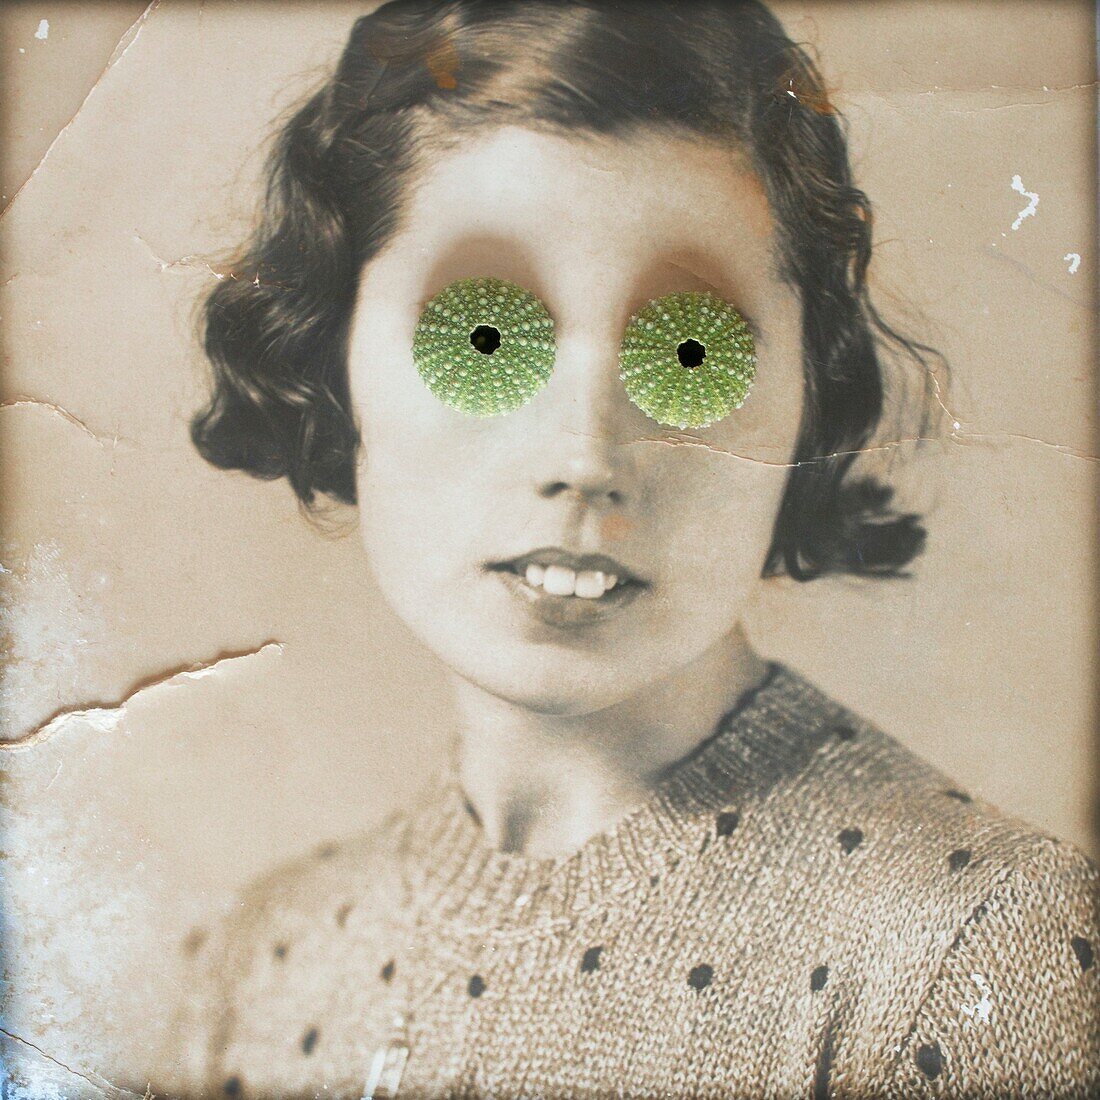 Antique portrait of young woman looking at the camera, with two sea urchins covering her eyes